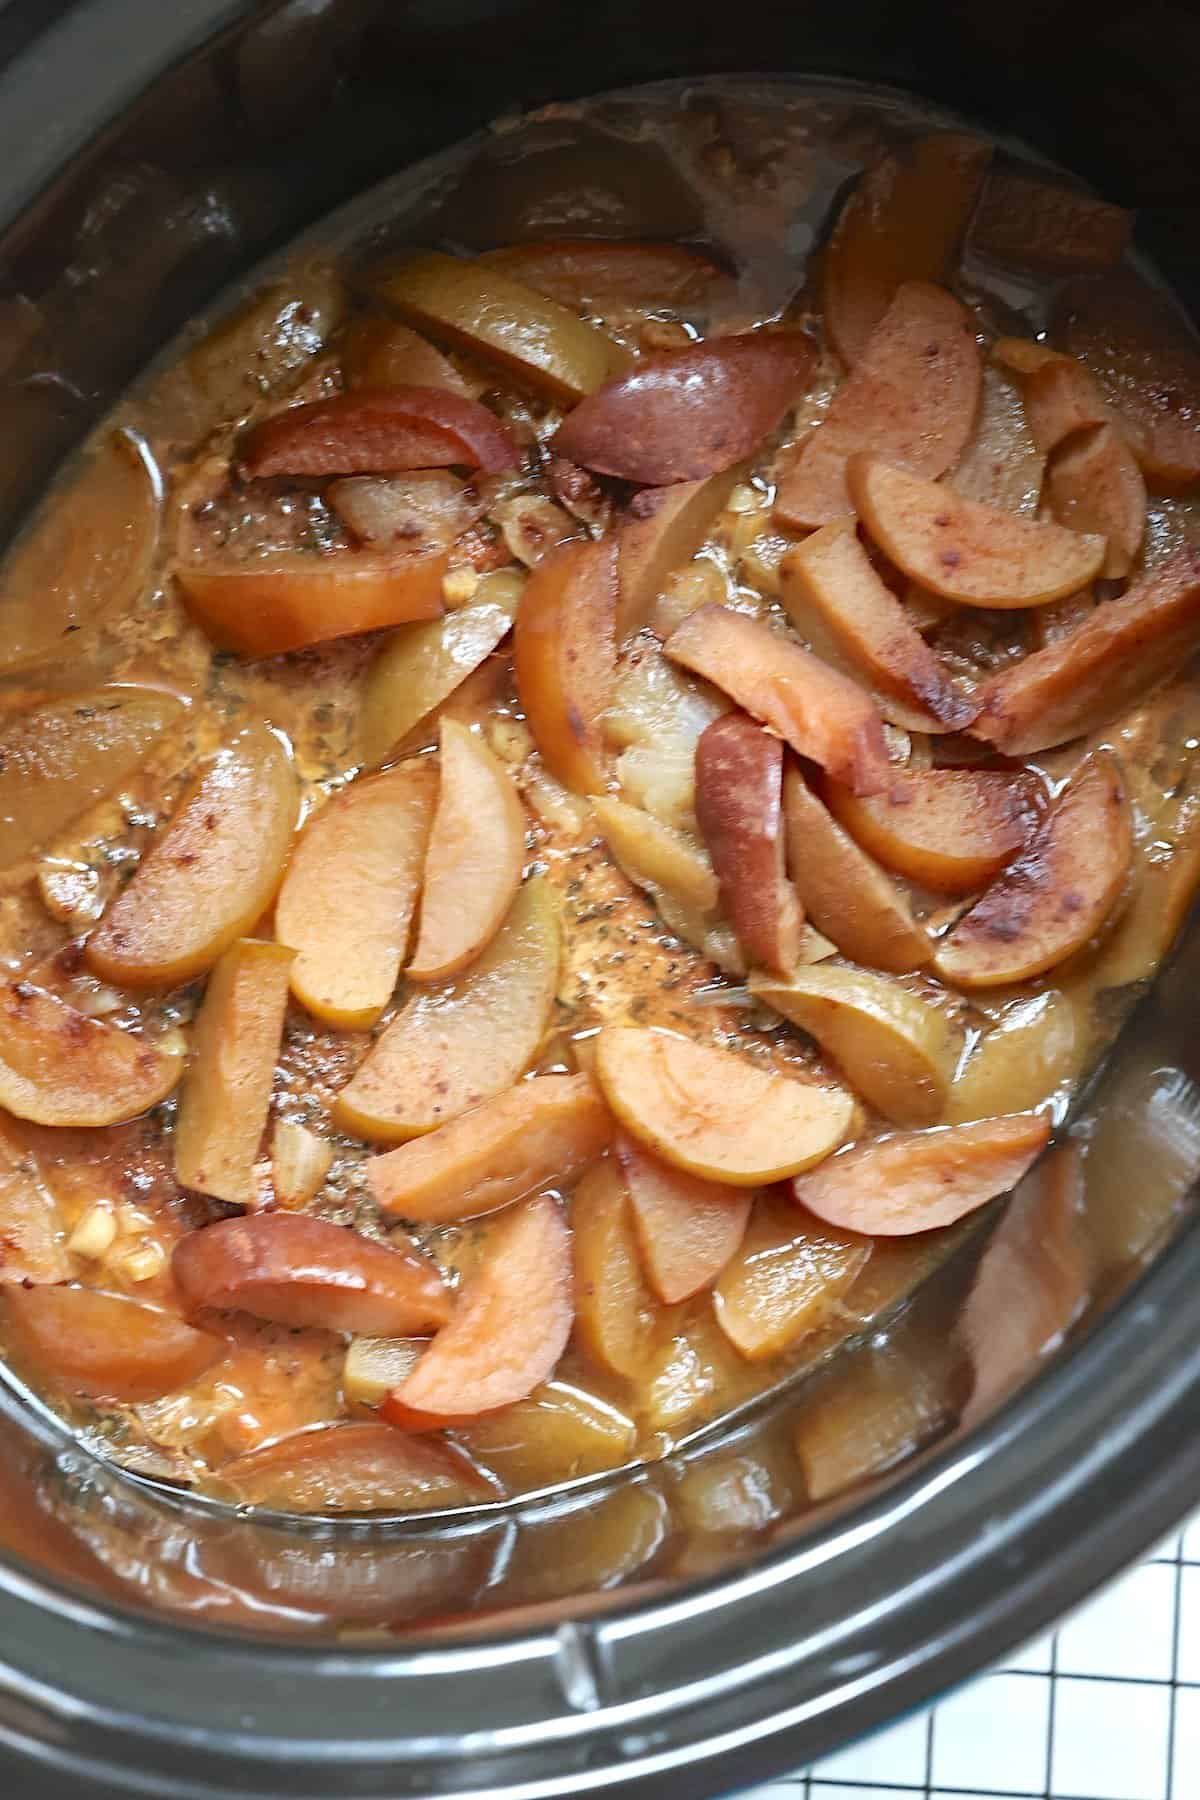 cooked apples, onions, pork chops and seasonings in a slow cooker